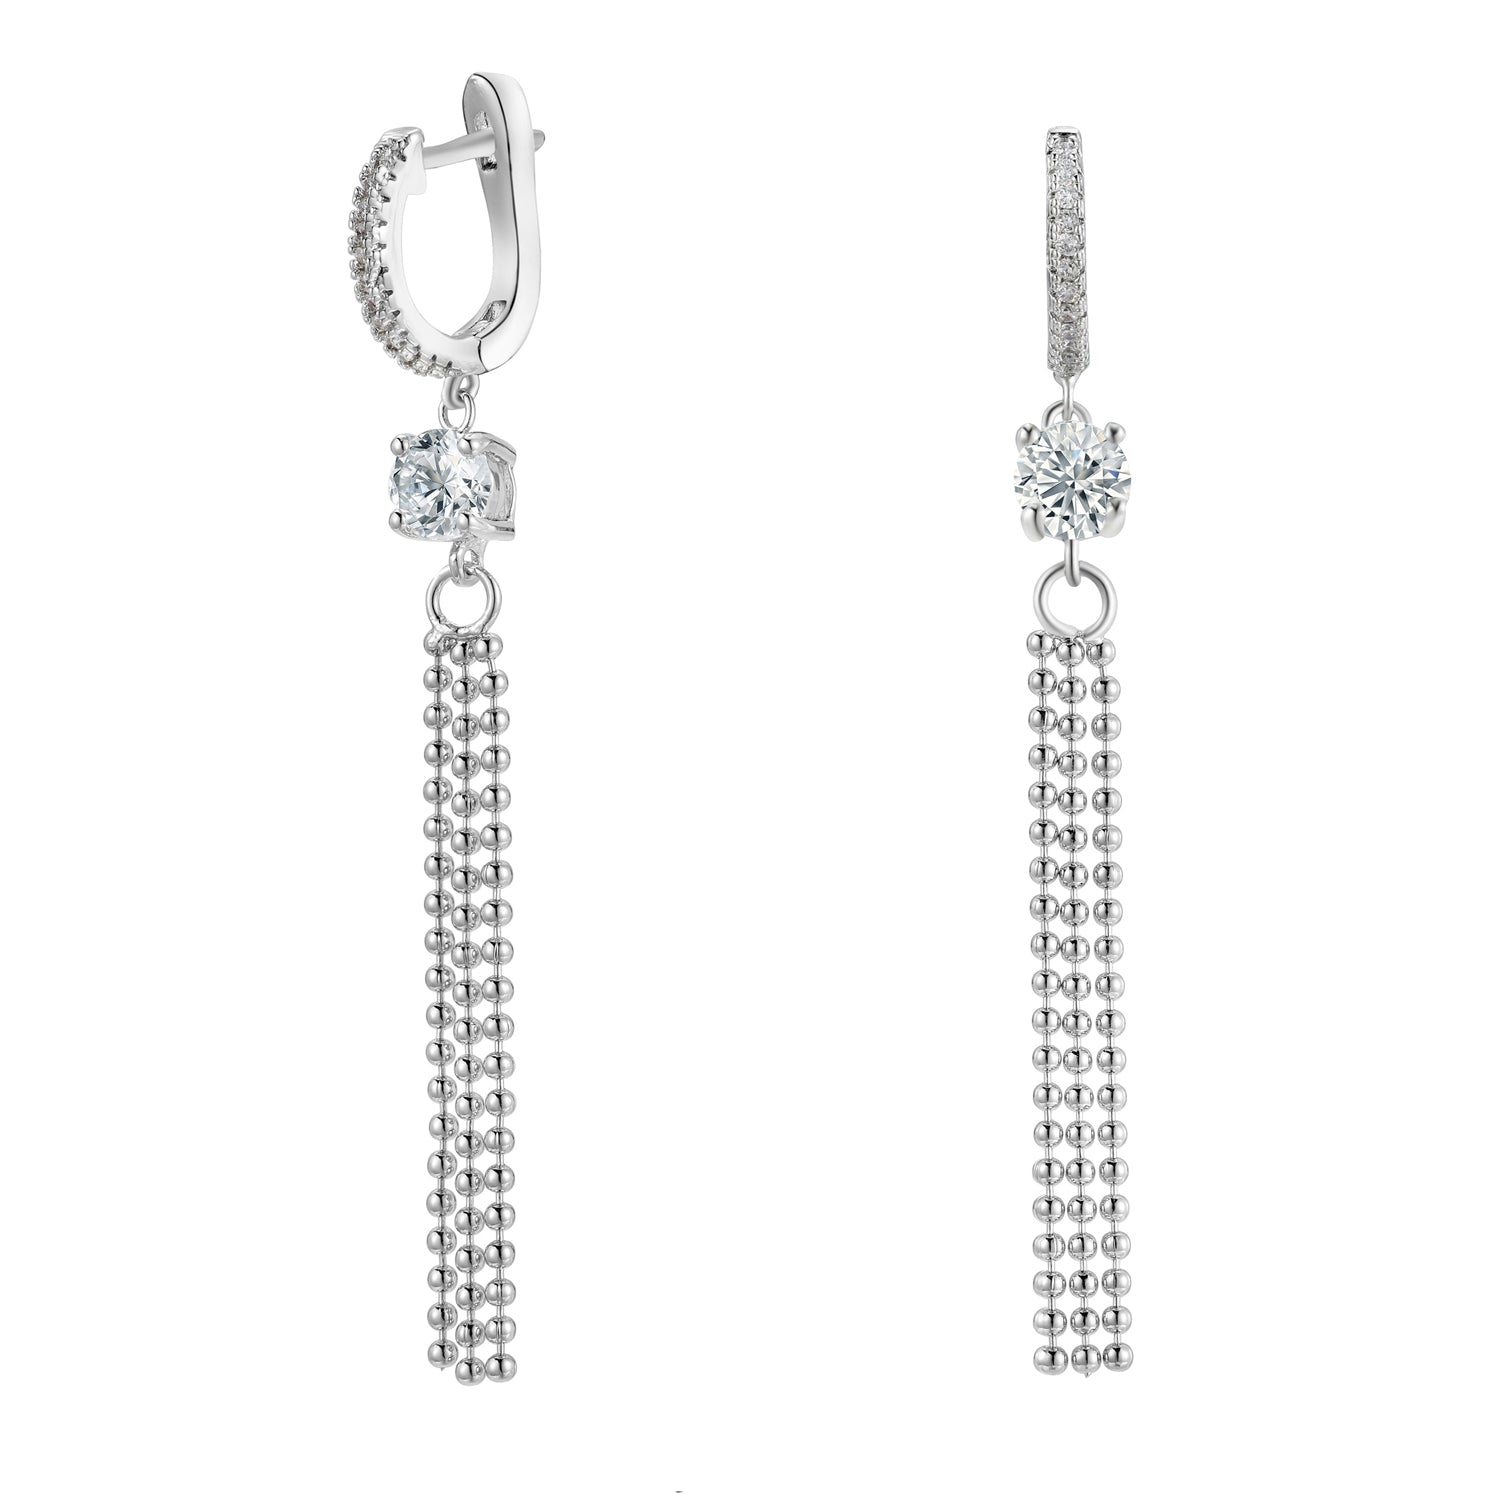 Raya 18k White Gold Plated Silver Hoop Dangle Earrings with Simulated Diamond CZ Crystals